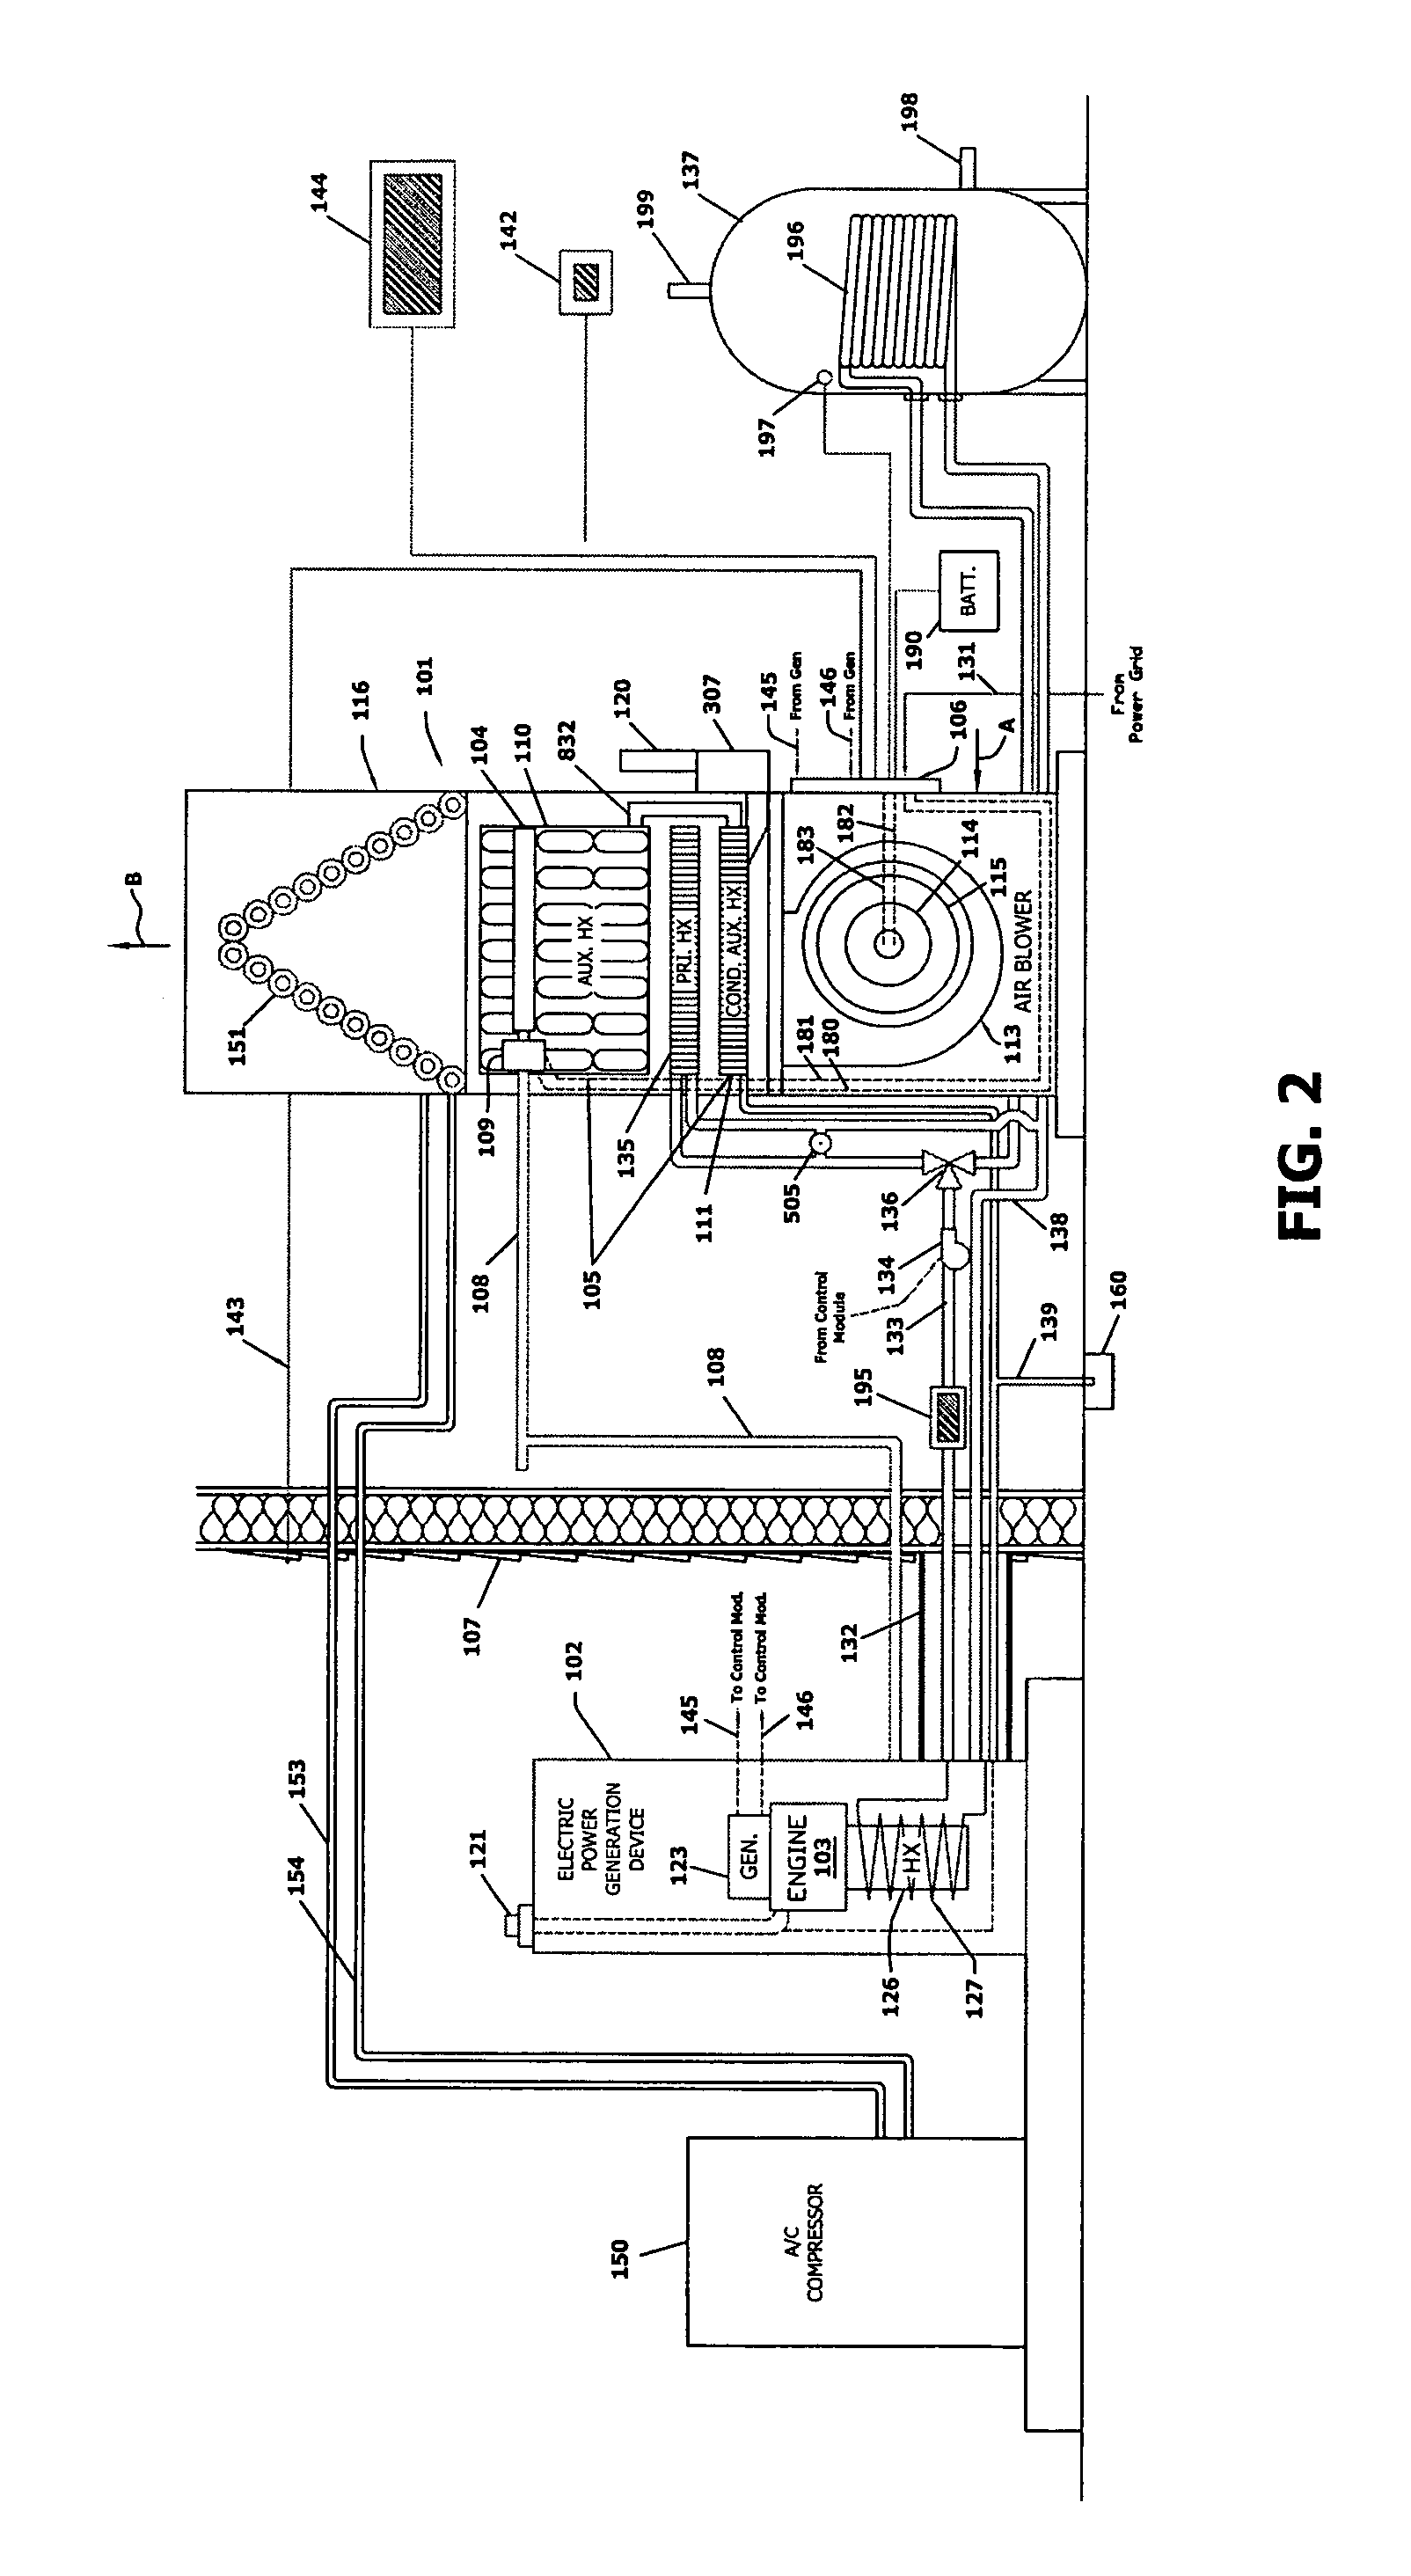 System and method for warm air space heating with electrical power generation